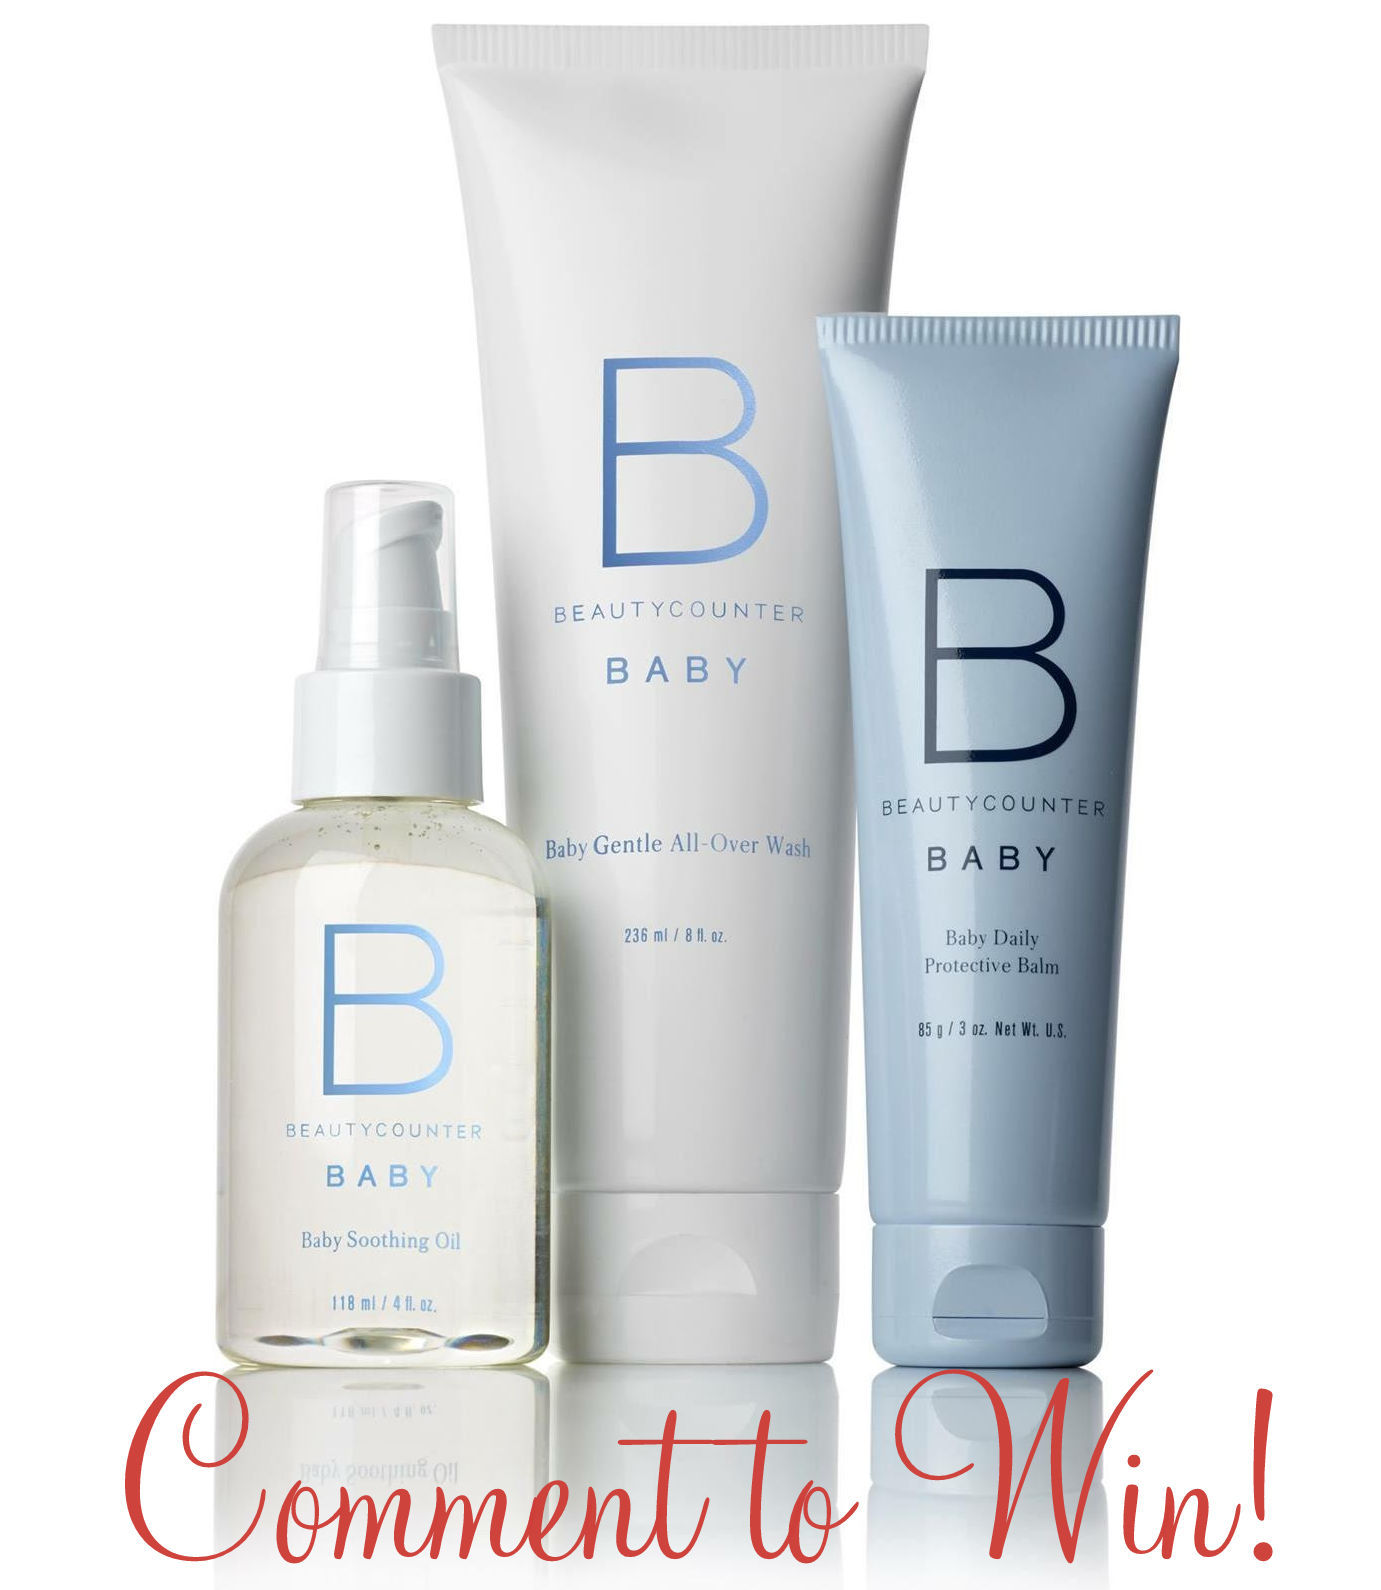 BeautyCounter Baby Line Giveaway and Canada Availability